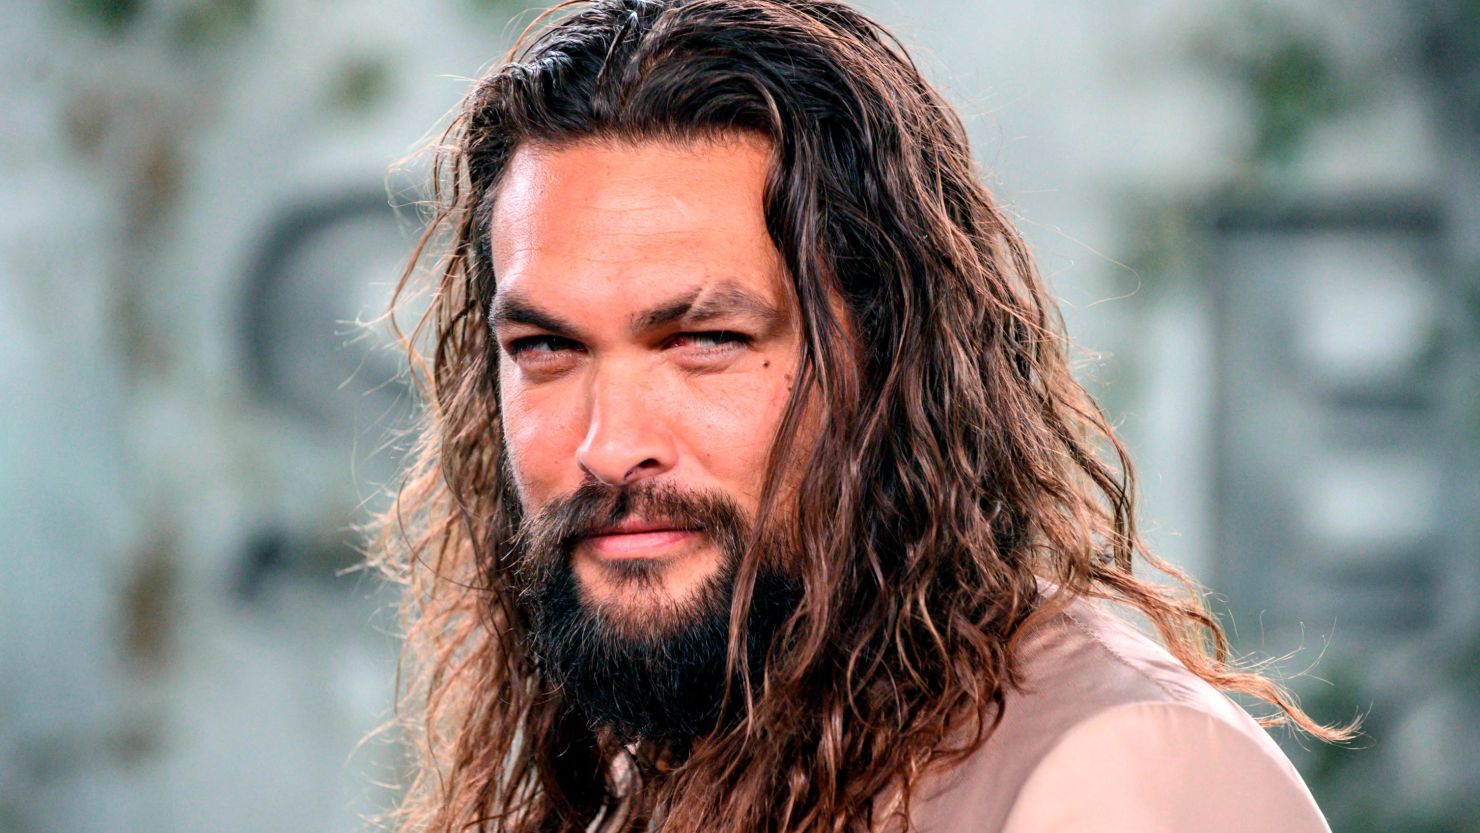 Jason Momoa’s Subtle Changes: Can You Spot The Differences?